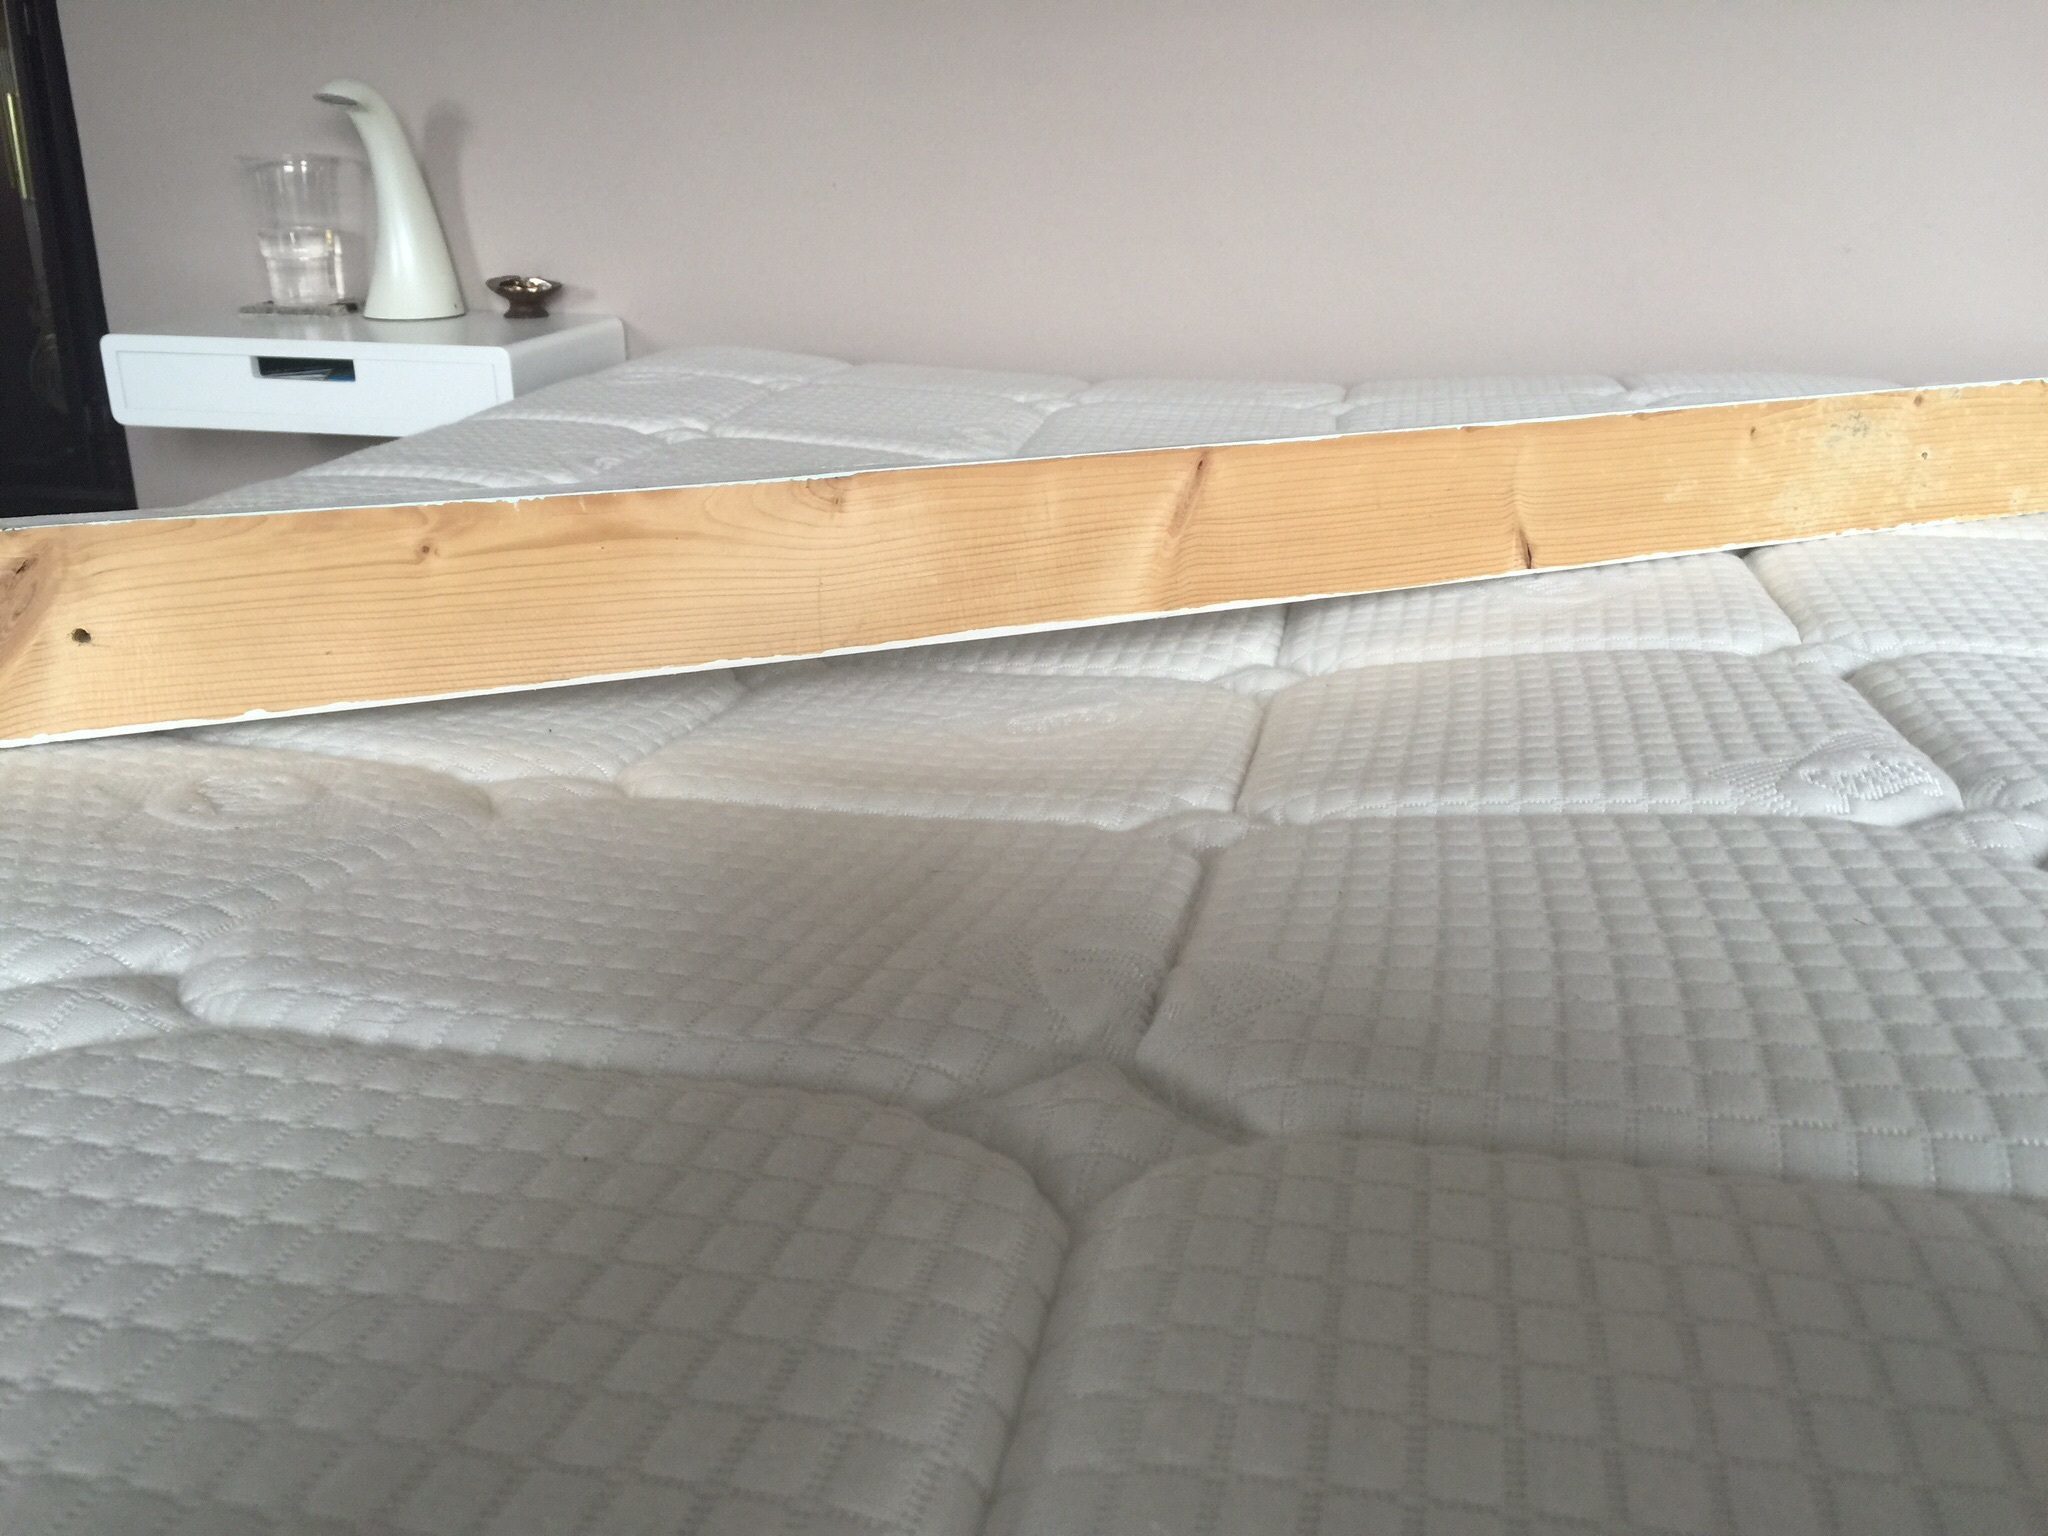 Top 410 Reviews and Complaints about Sealy Mattress | Page 4 Why Does My Mattress Have A Hump In The Middle